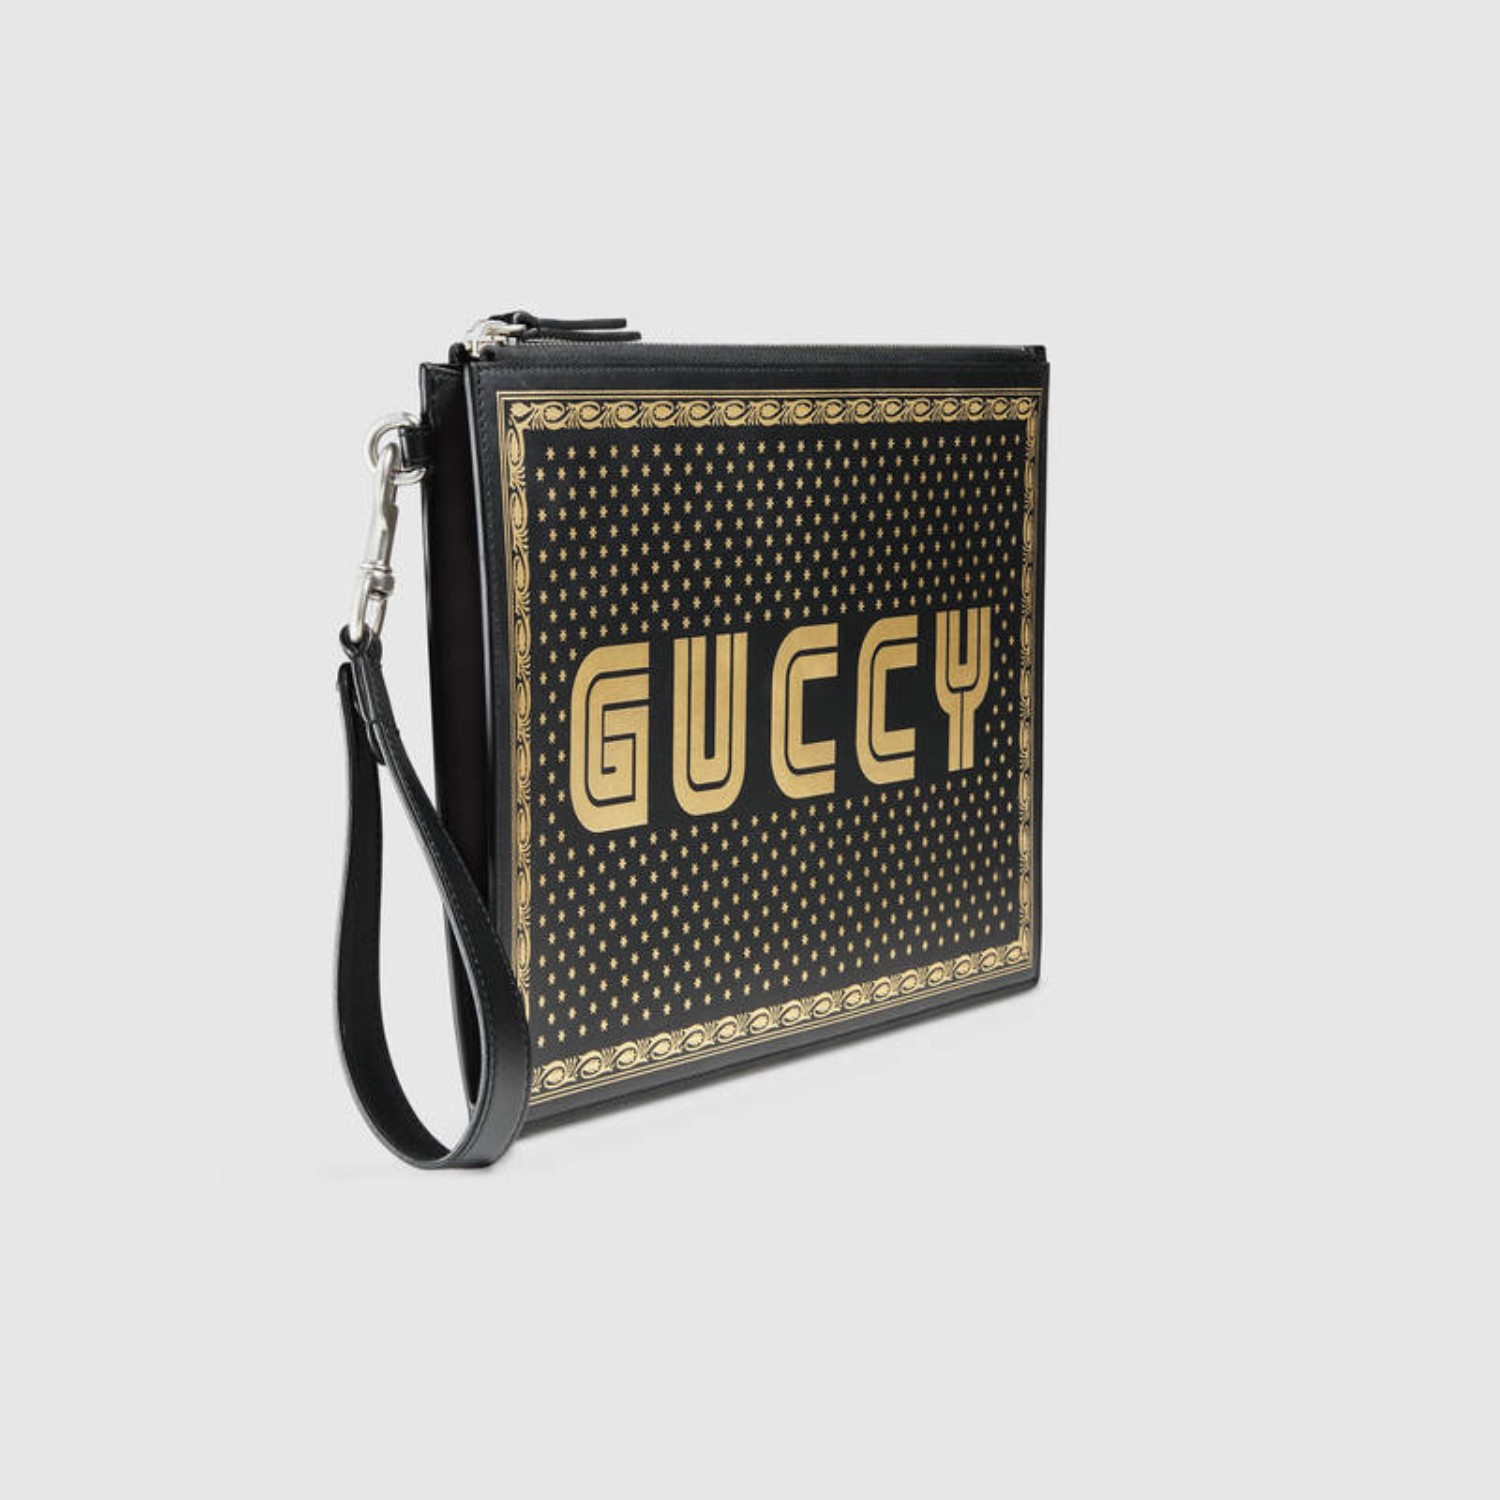 Gucci Stays Playful With With Guccy SEGA Collection1500 x 1500